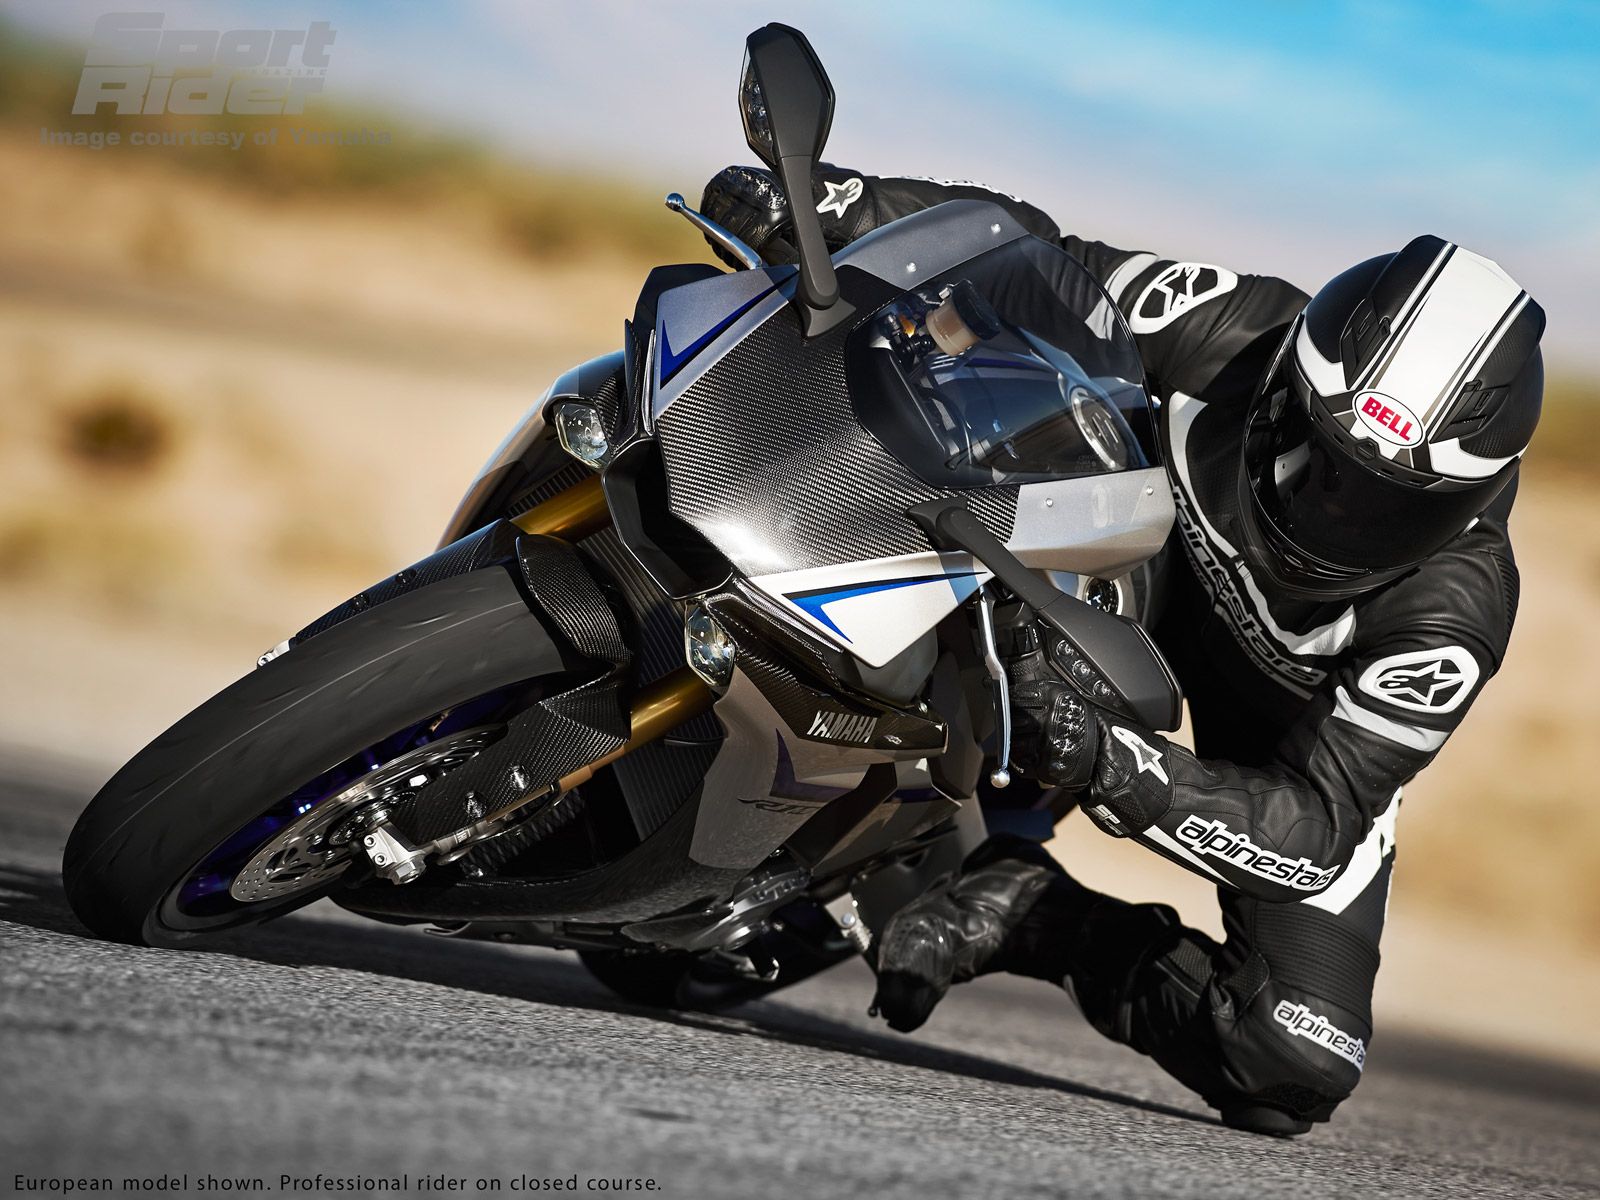 Image Gallery: The 2015 Yamaha YZF R1 And R1M In Action